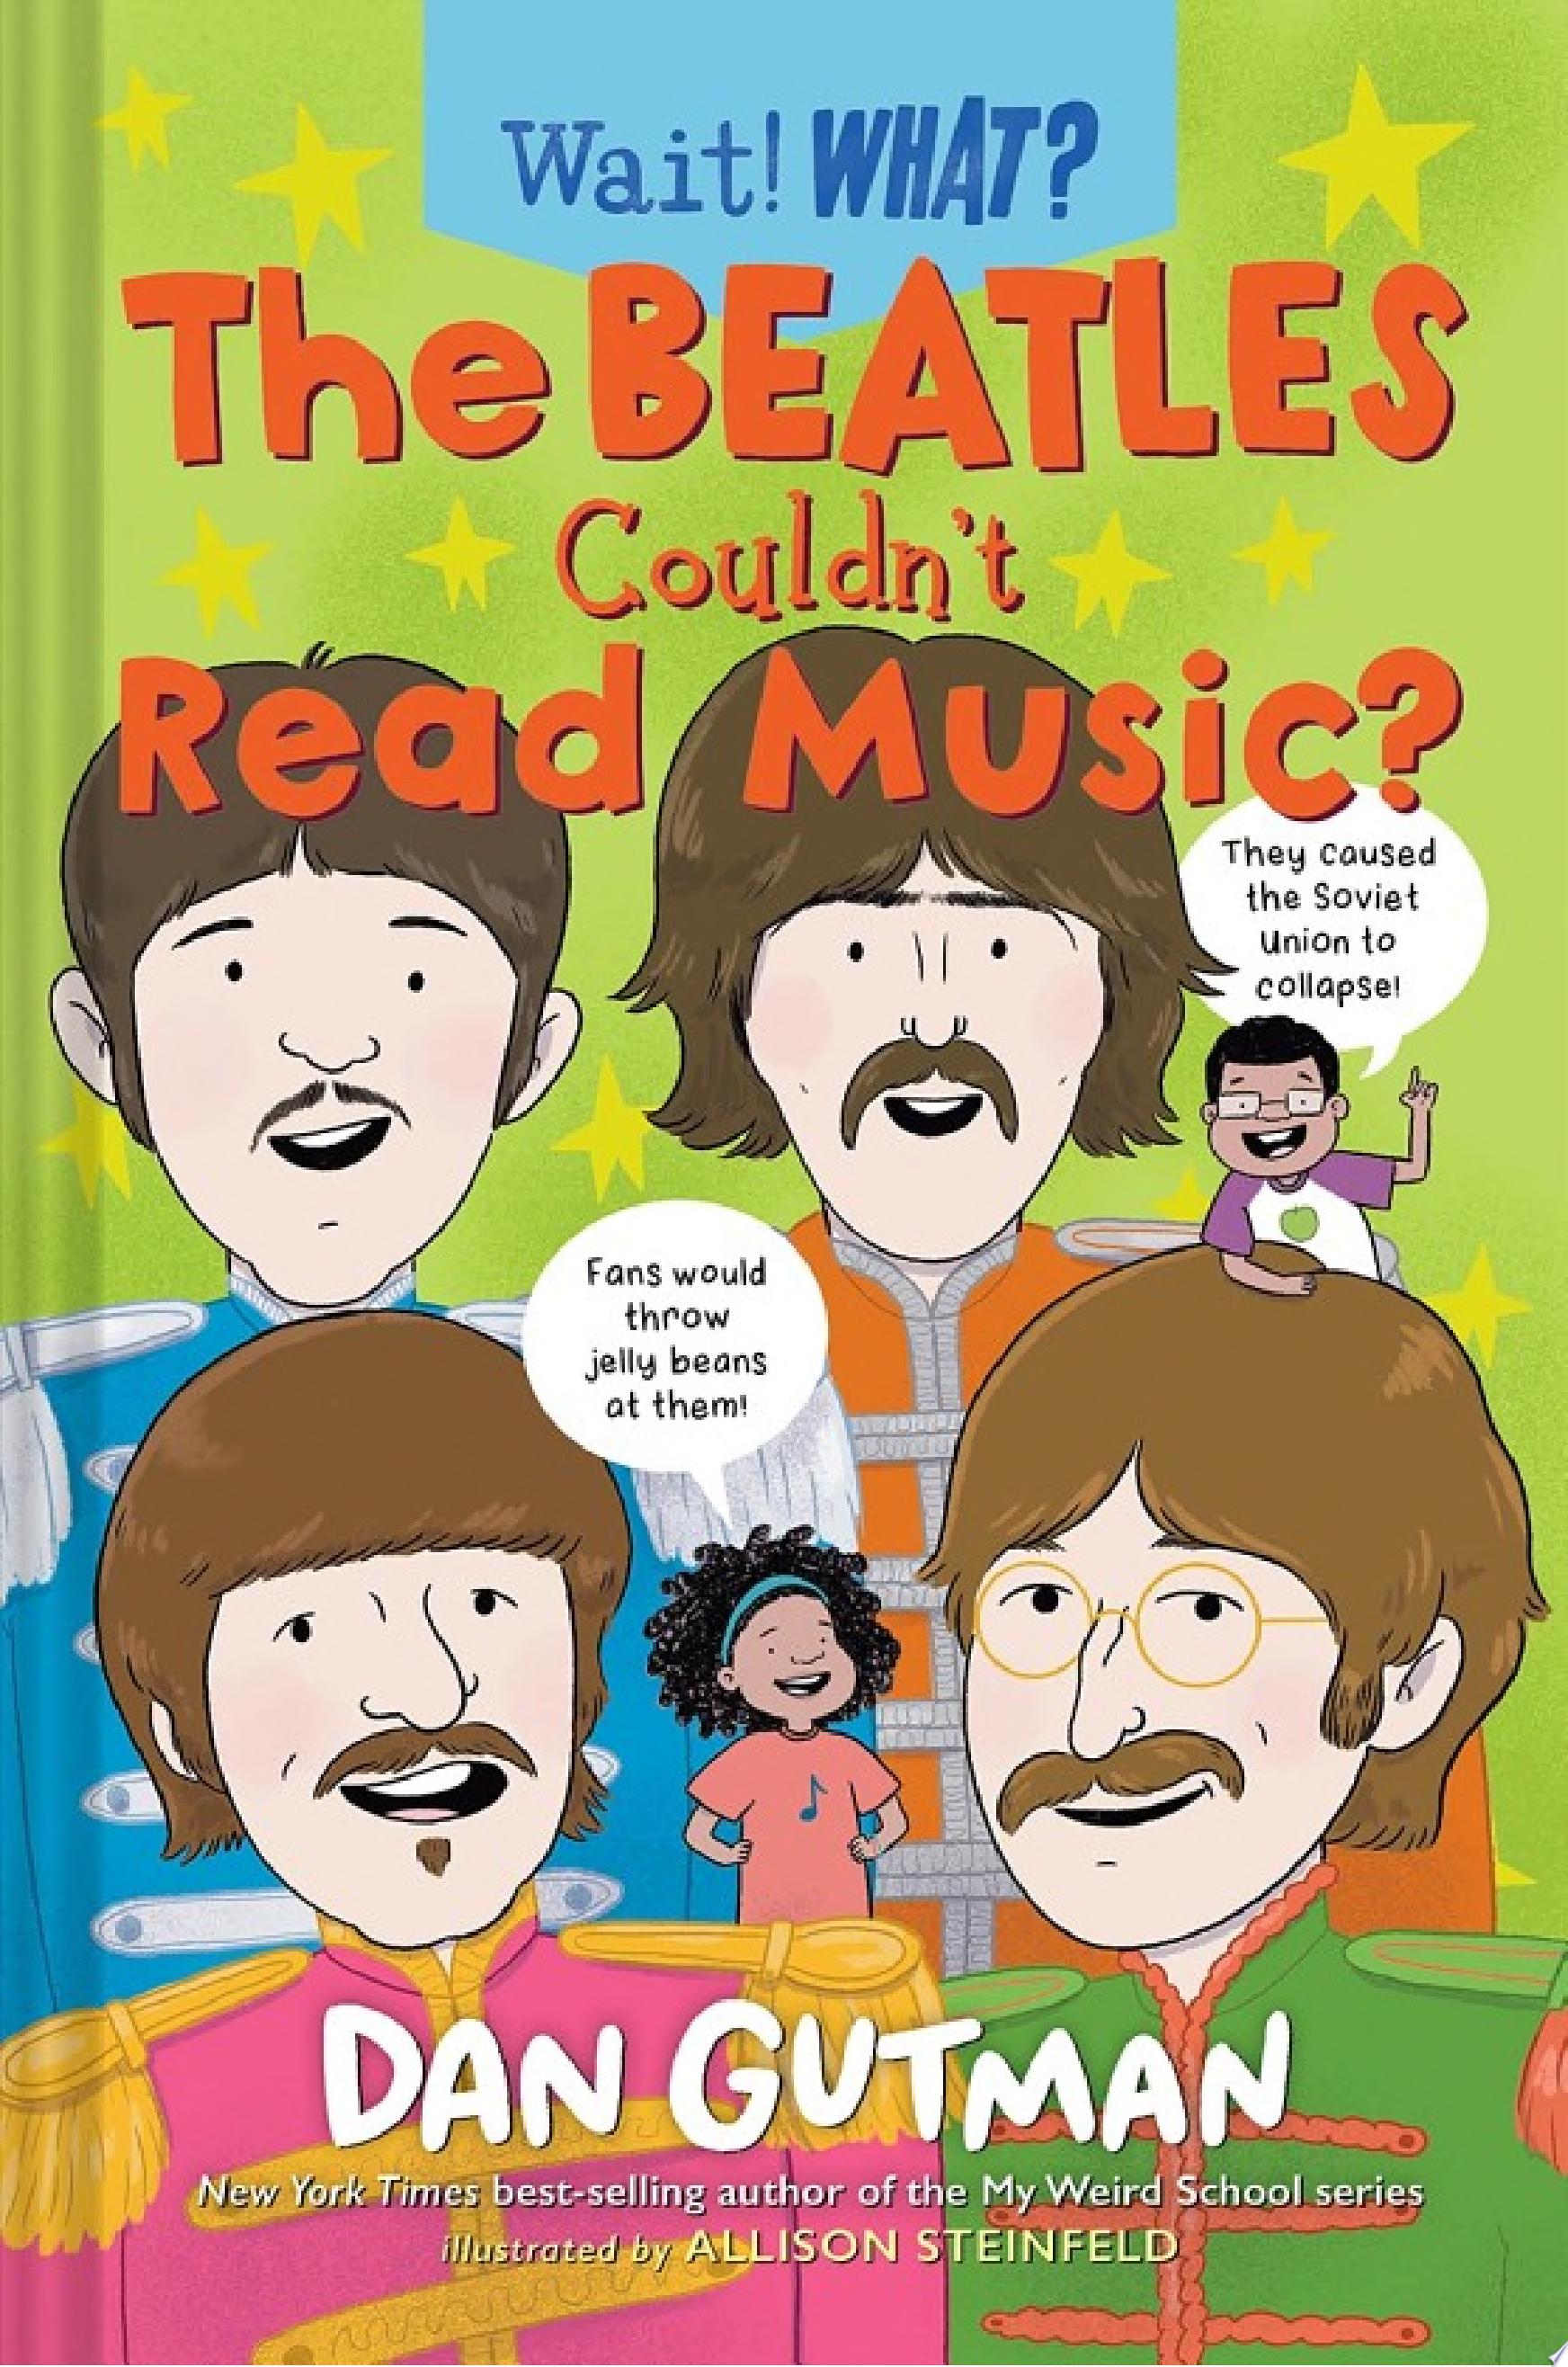 Image for "The Beatles Couldn&#039;t Read Music? (Wait! What?)"